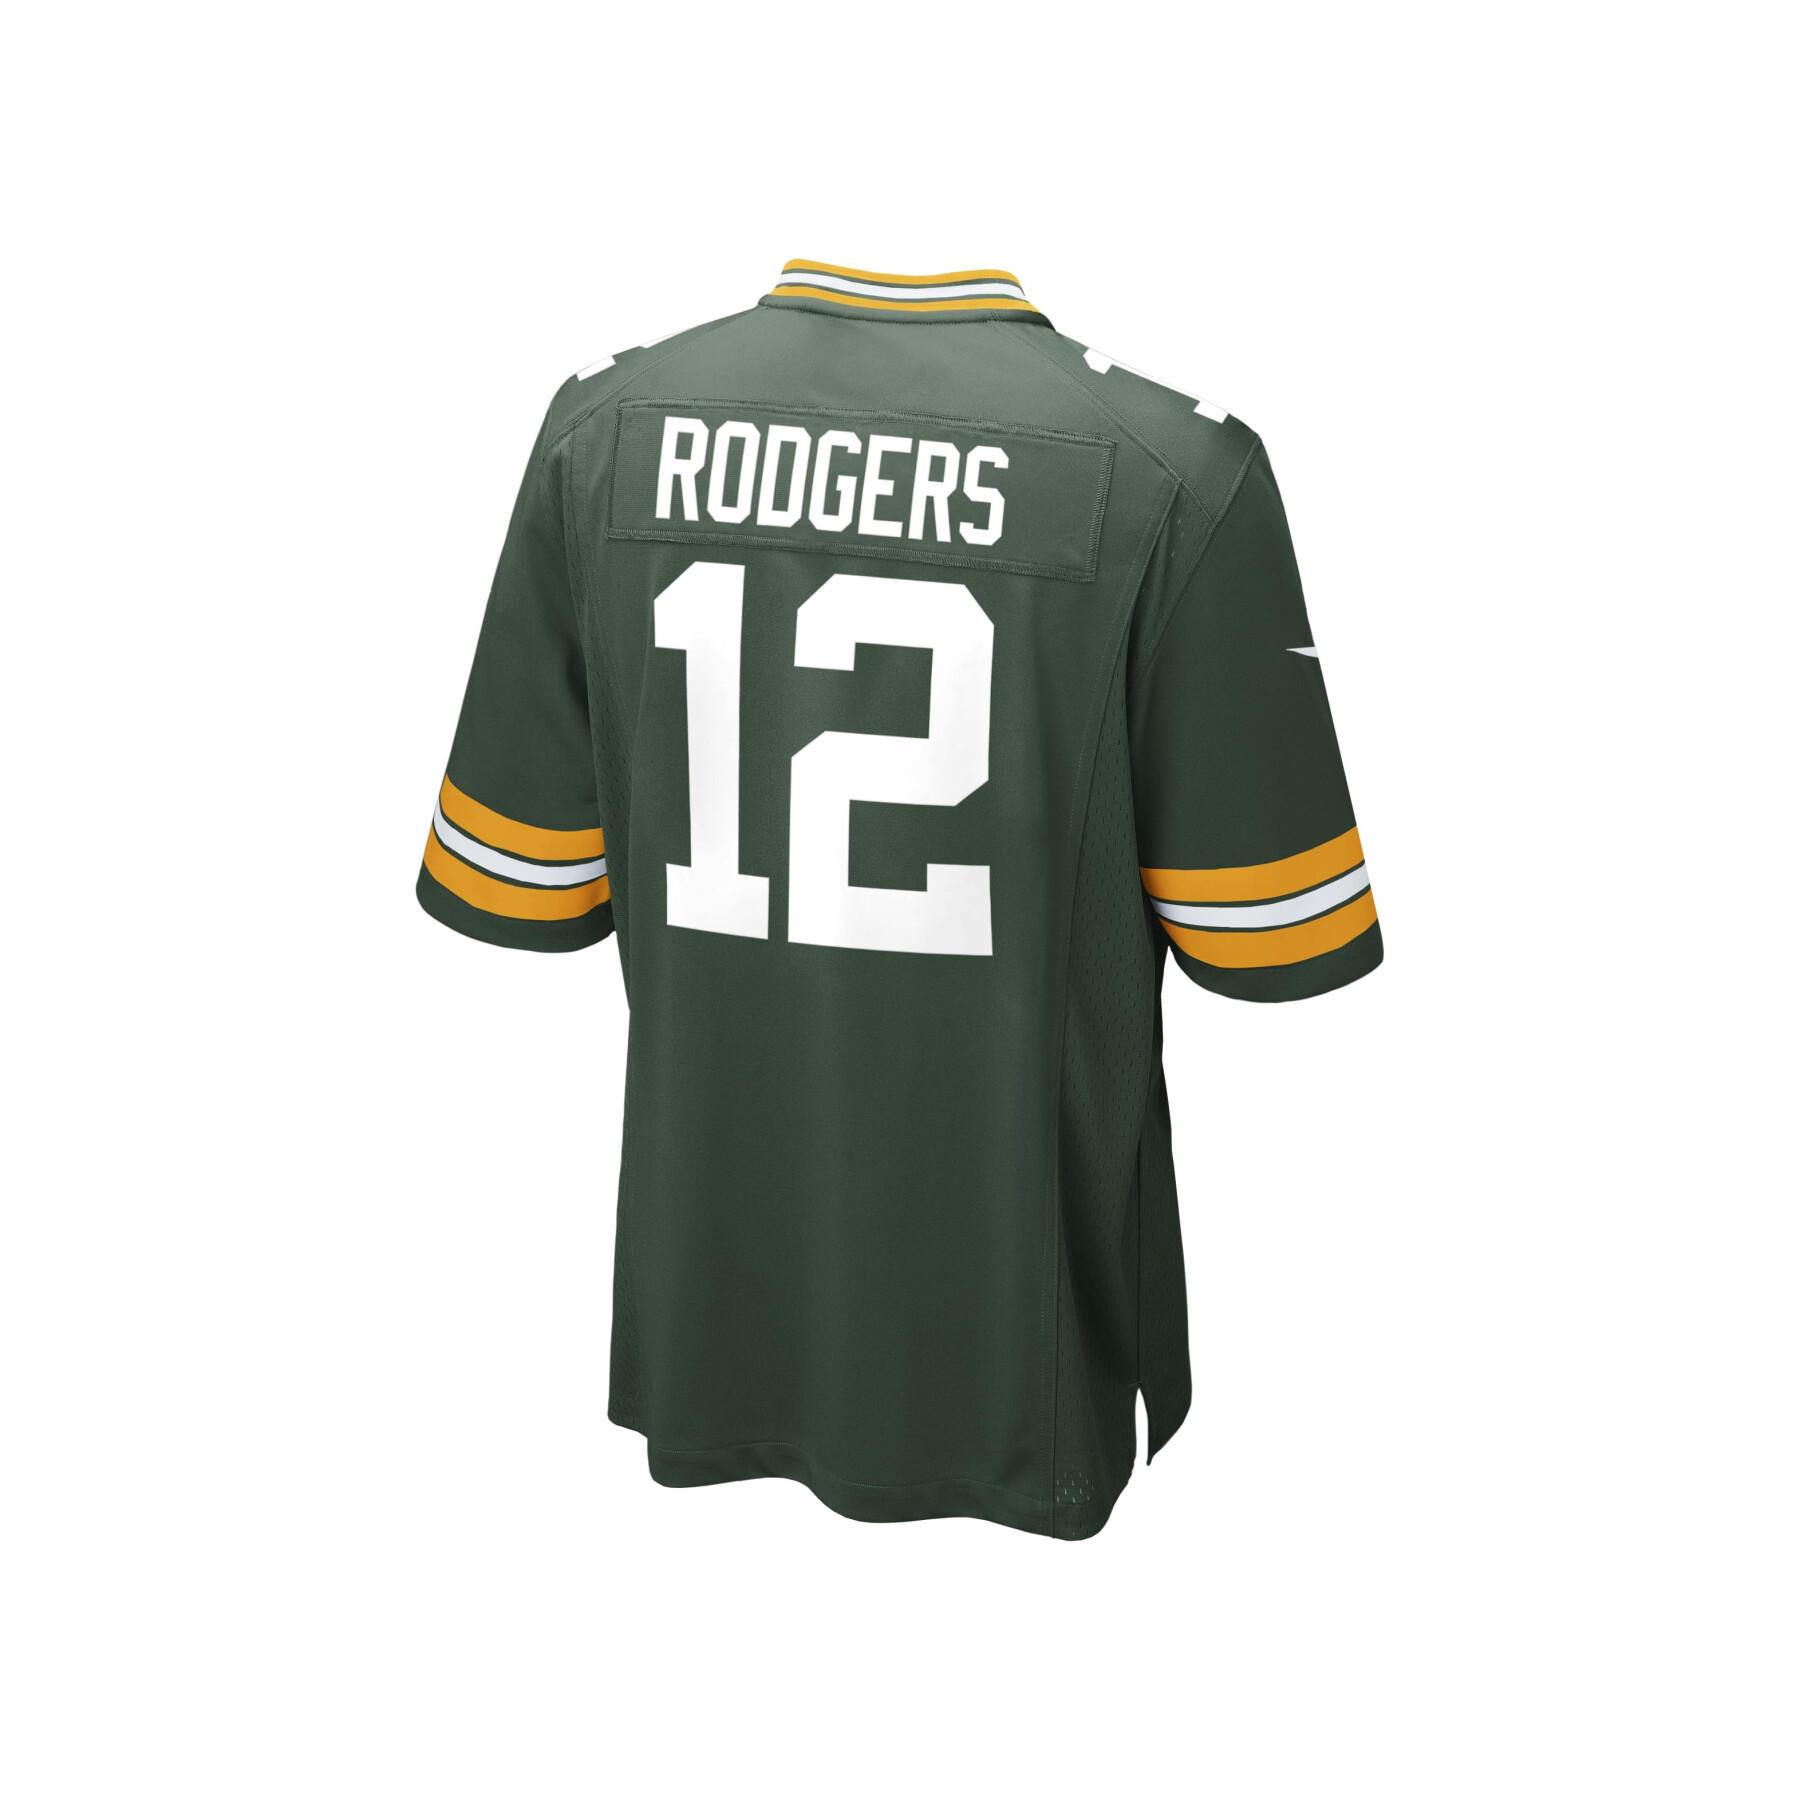 Camisola Green Bay Packers "Aaron Rodgers" temporada 2021/22